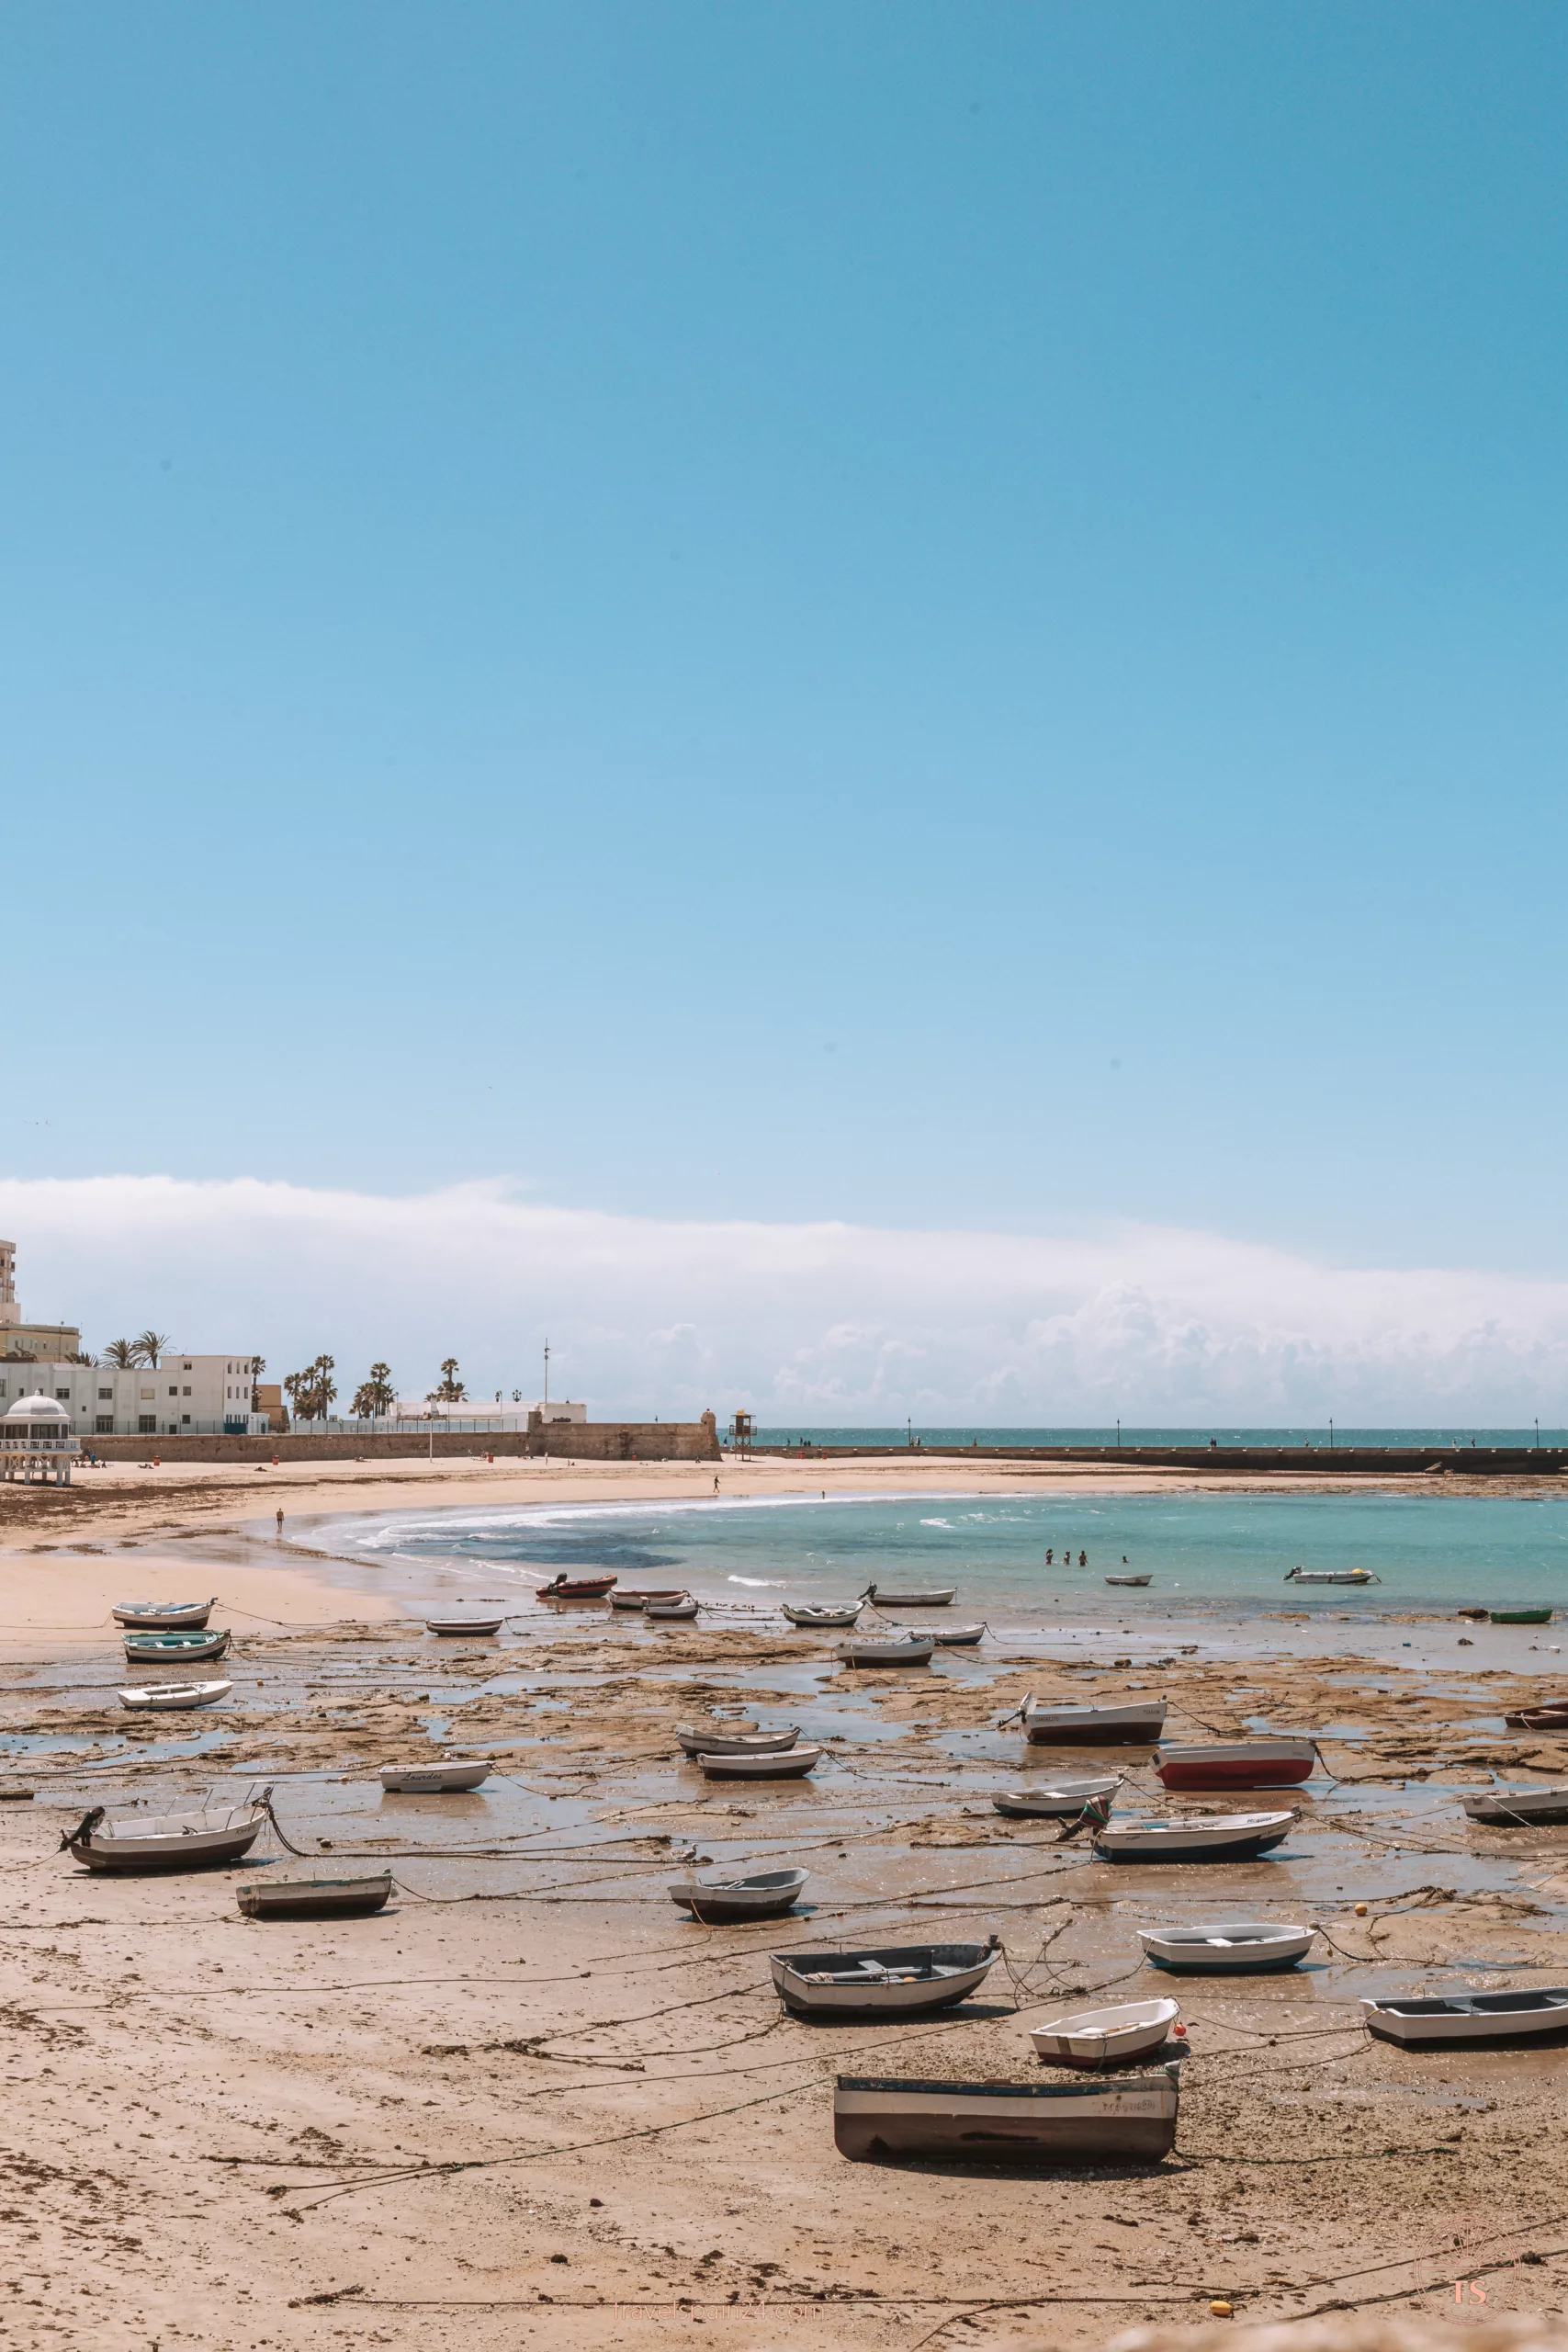 Caleta Beach in Cadiz with boats resting on the sand. This beach is one of the Cadiz highlights, showcasing the picturesque coastal scenery and vibrant maritime culture.
